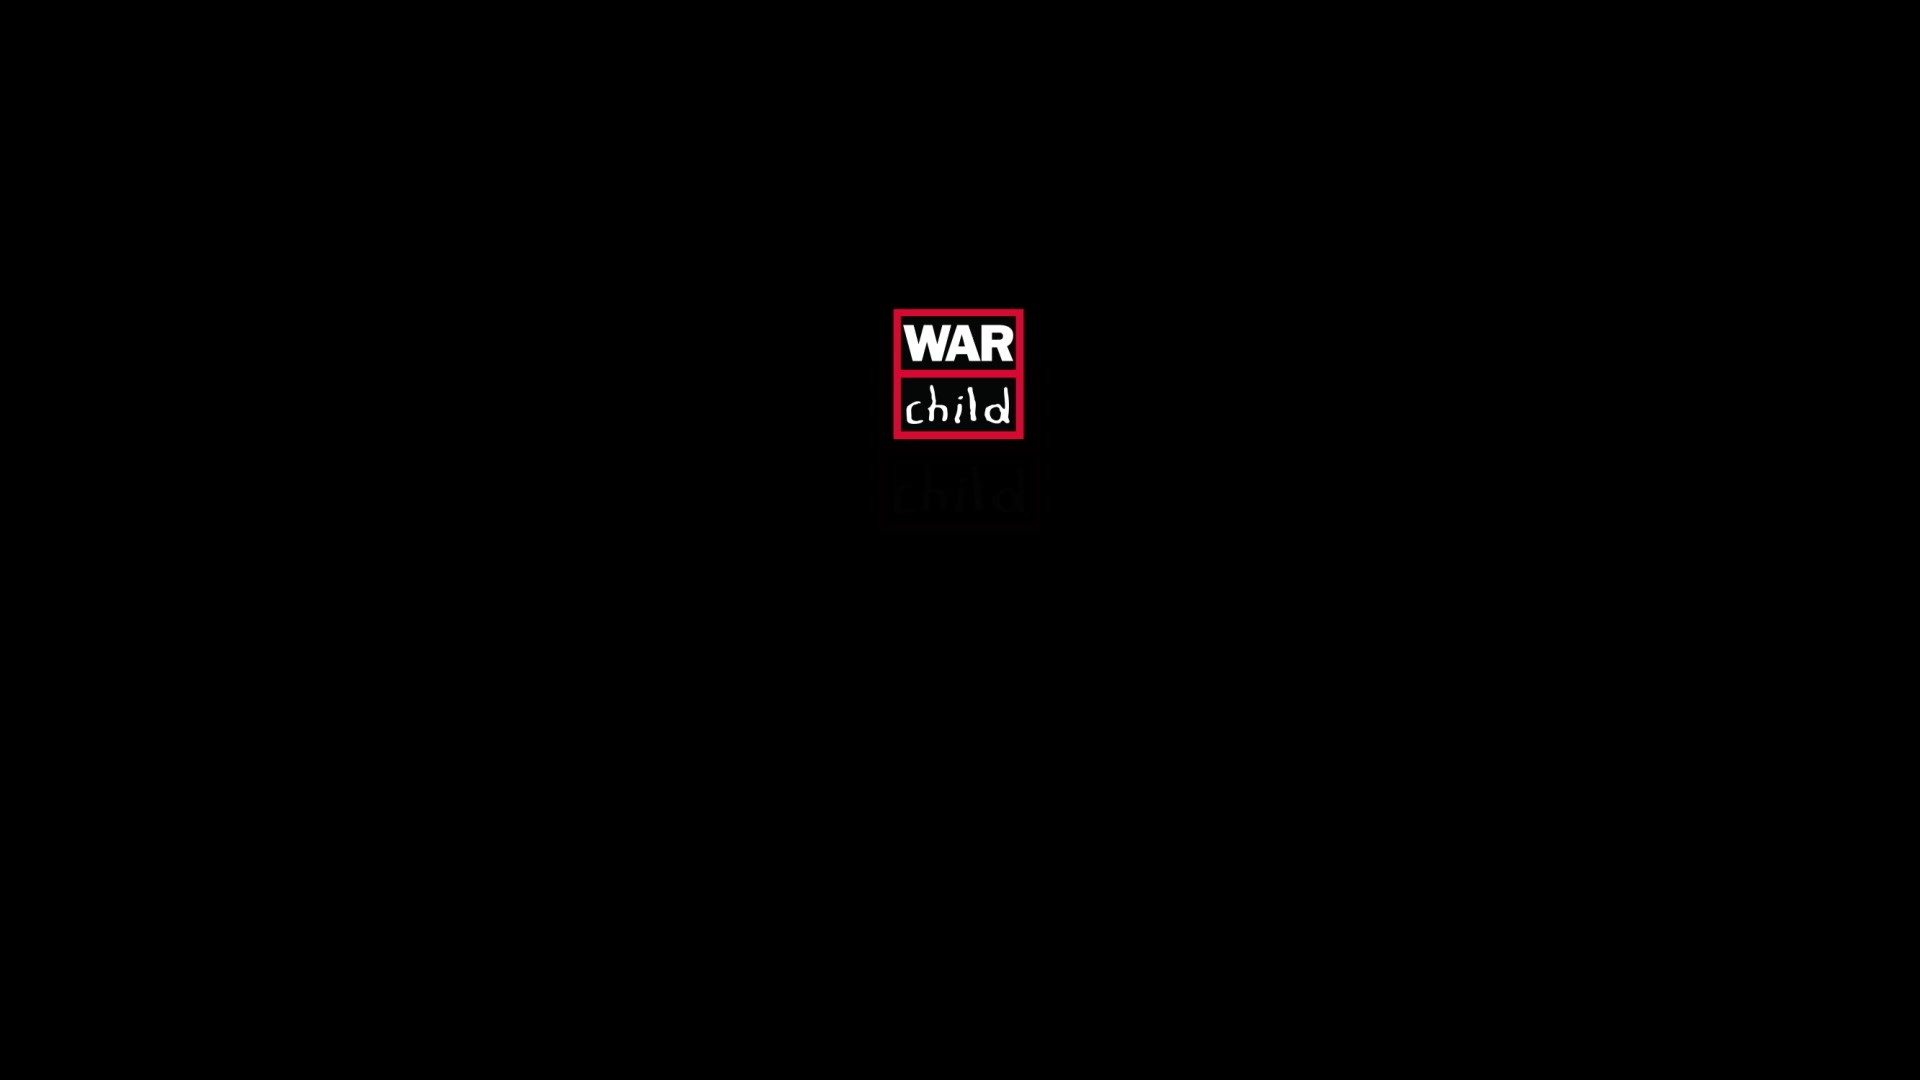 The Warcast. A 3d-audio journey of children in war.